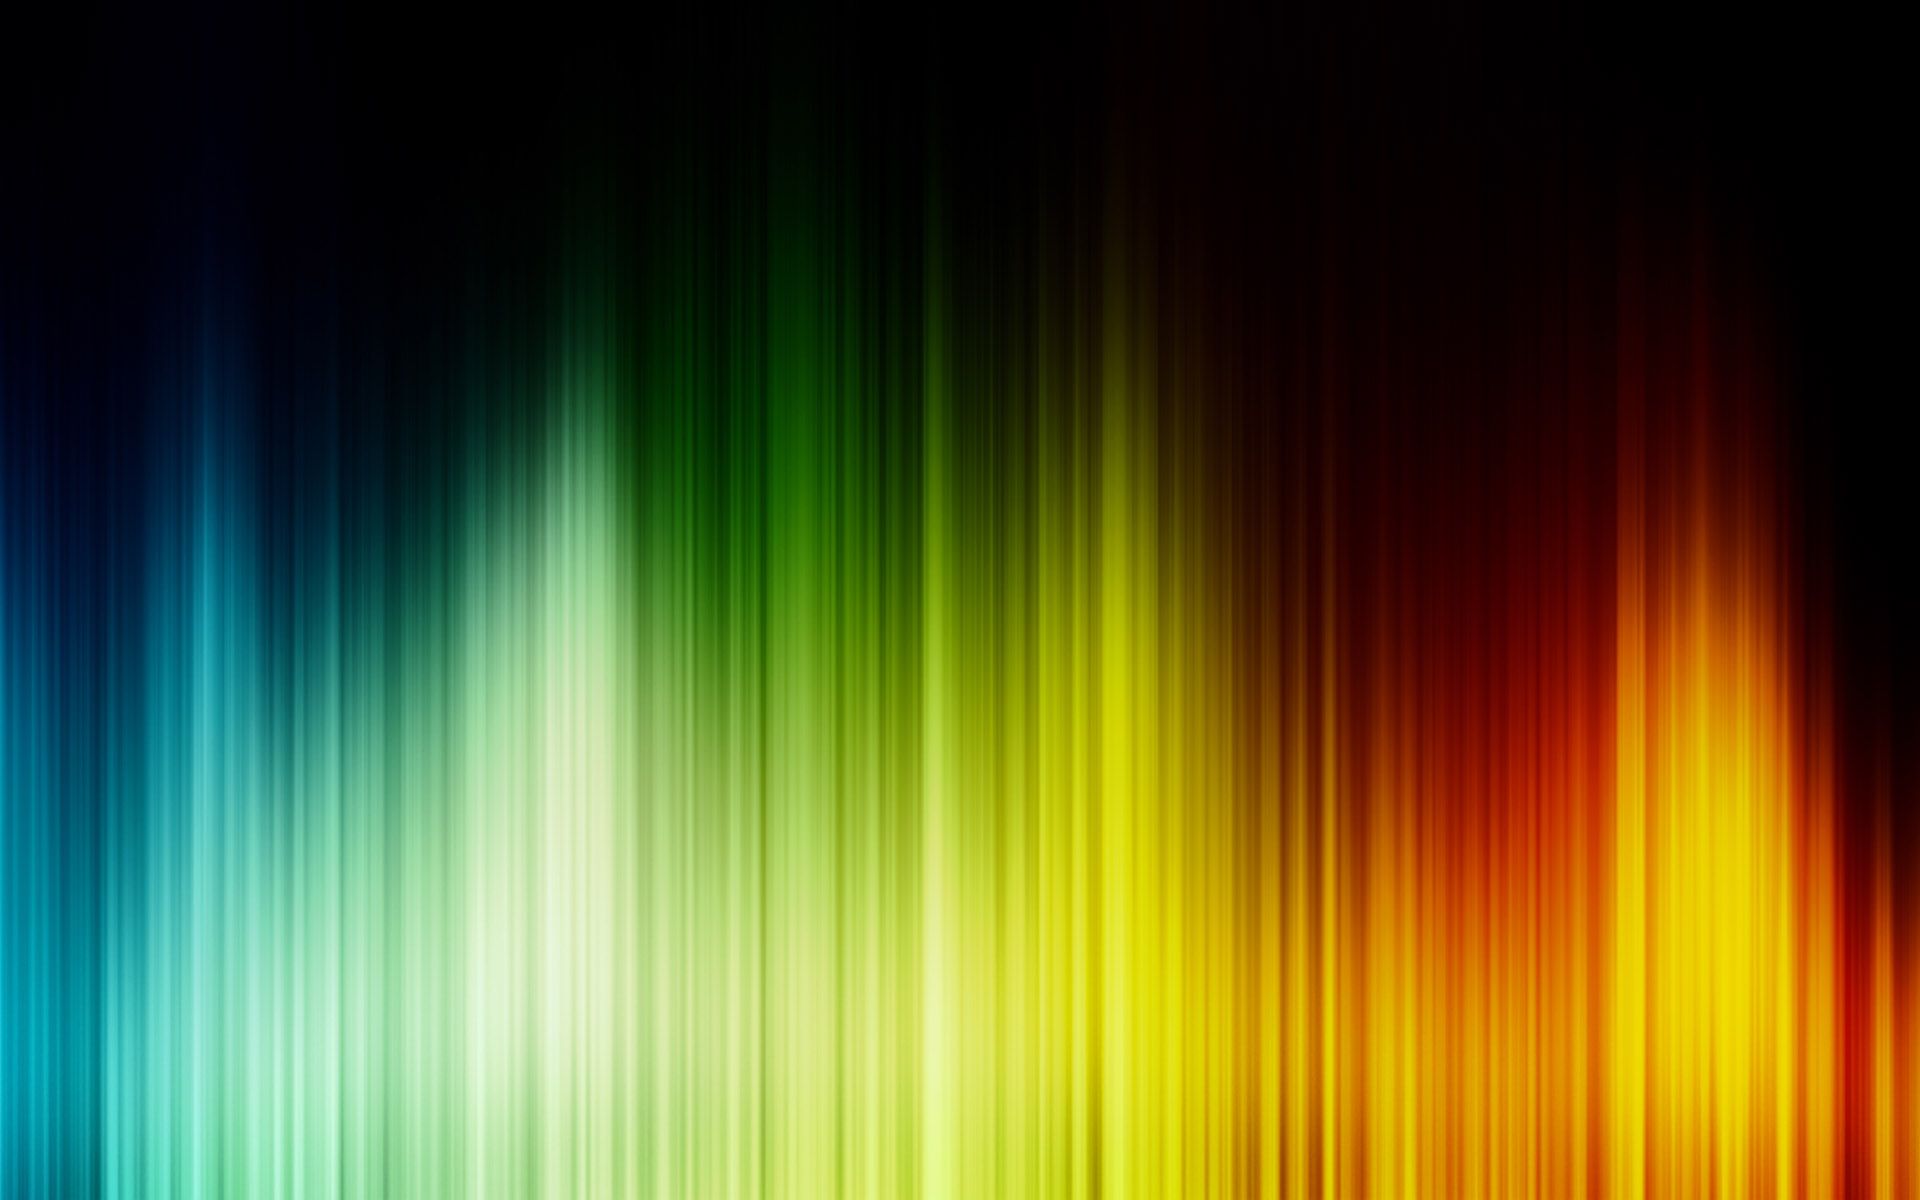 Color Spectrum Wallpapers And Images Wallpapers HD Wallpapers Download Free Images Wallpaper [wallpaper981.blogspot.com]